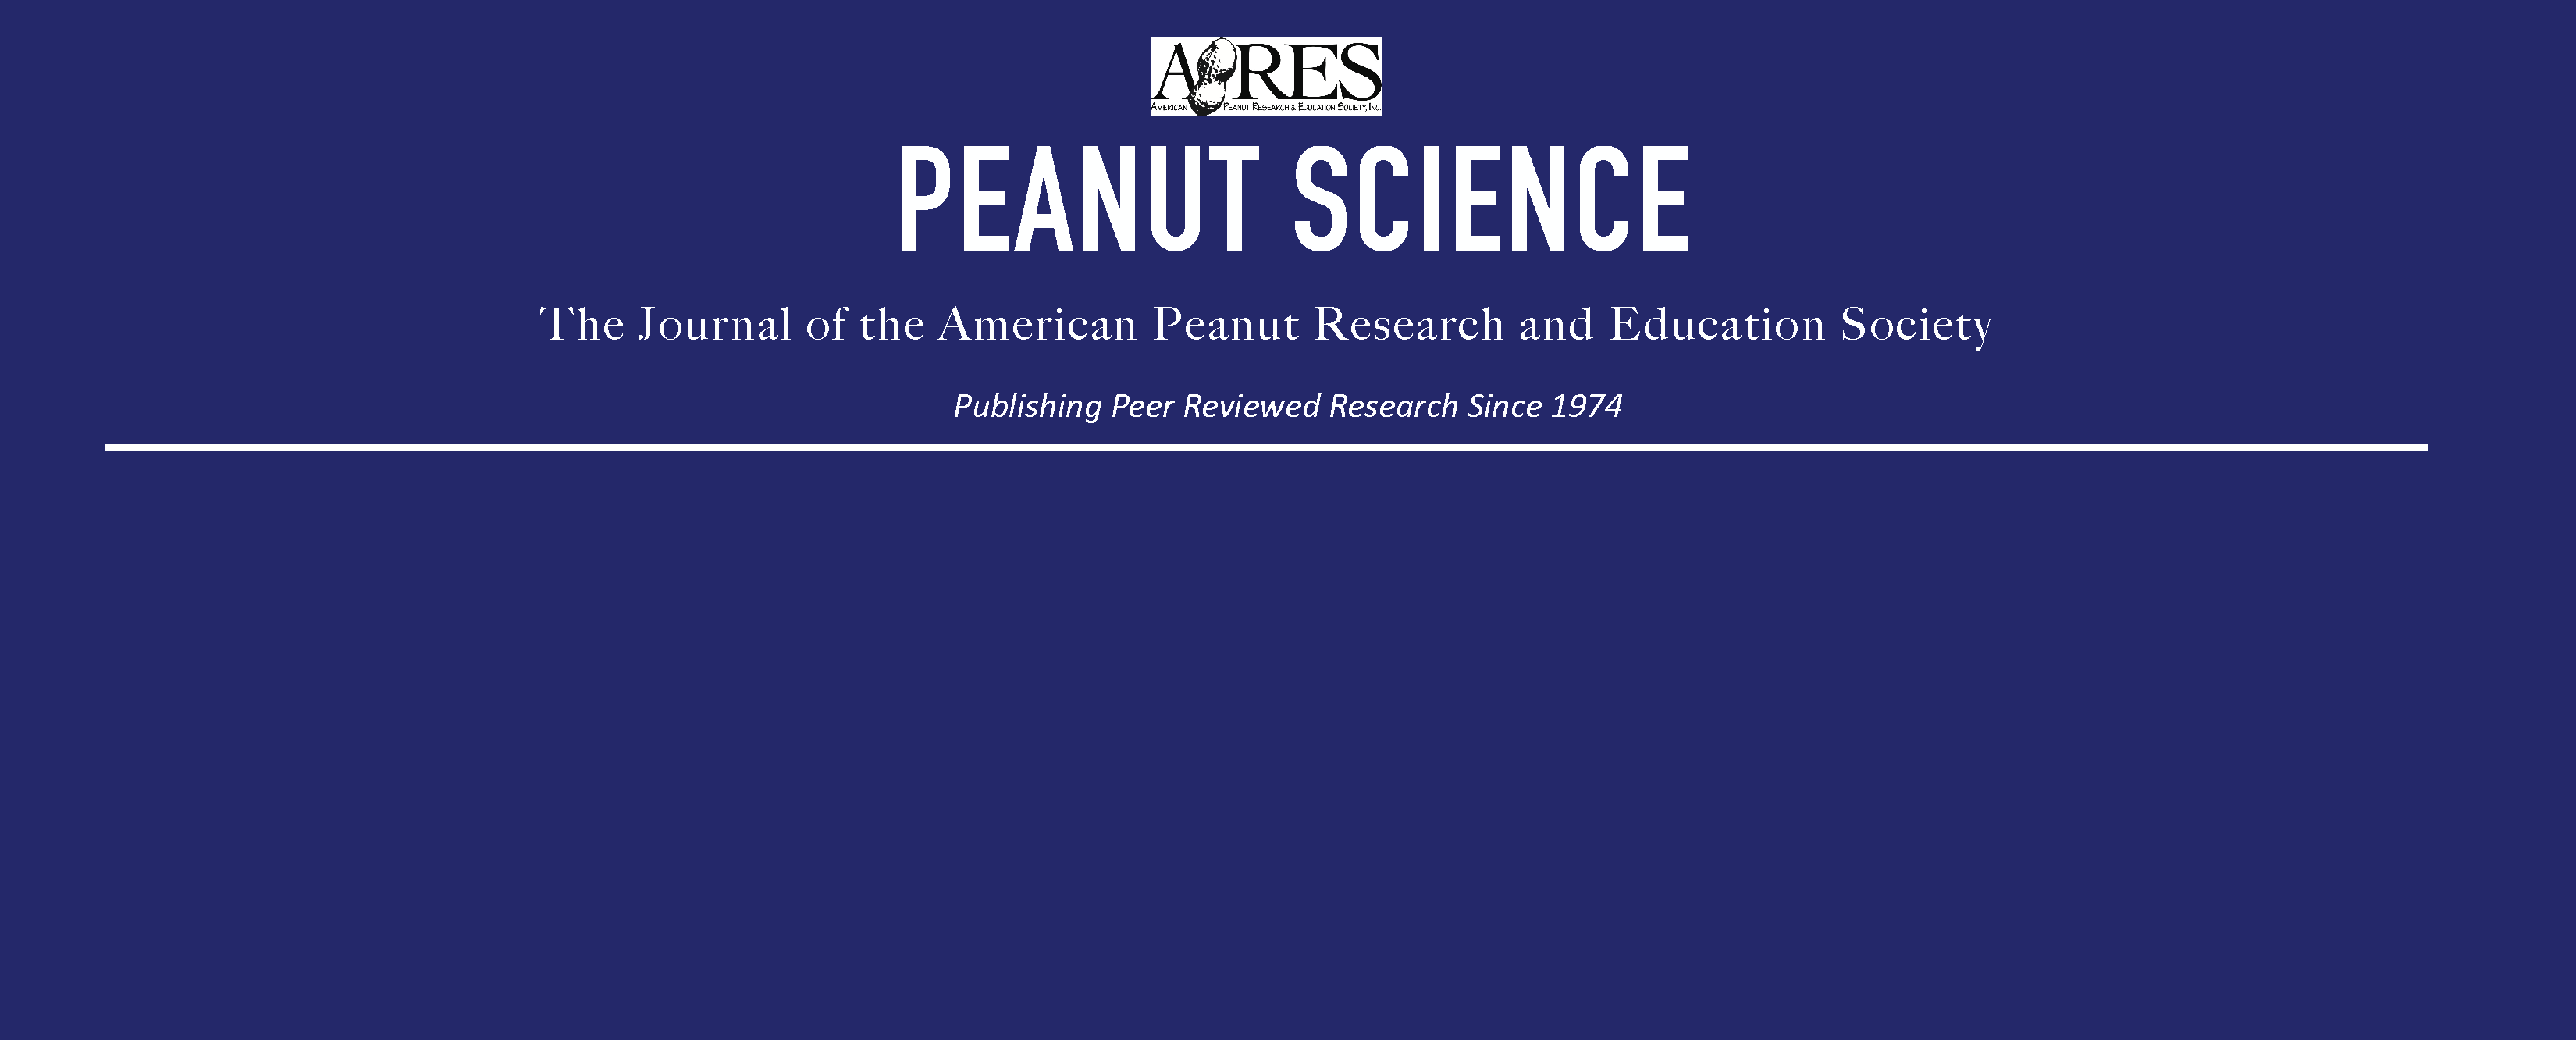 Weed Control and Response of Peanuts (Arachis Hypogaea) To Chlorimuron¹